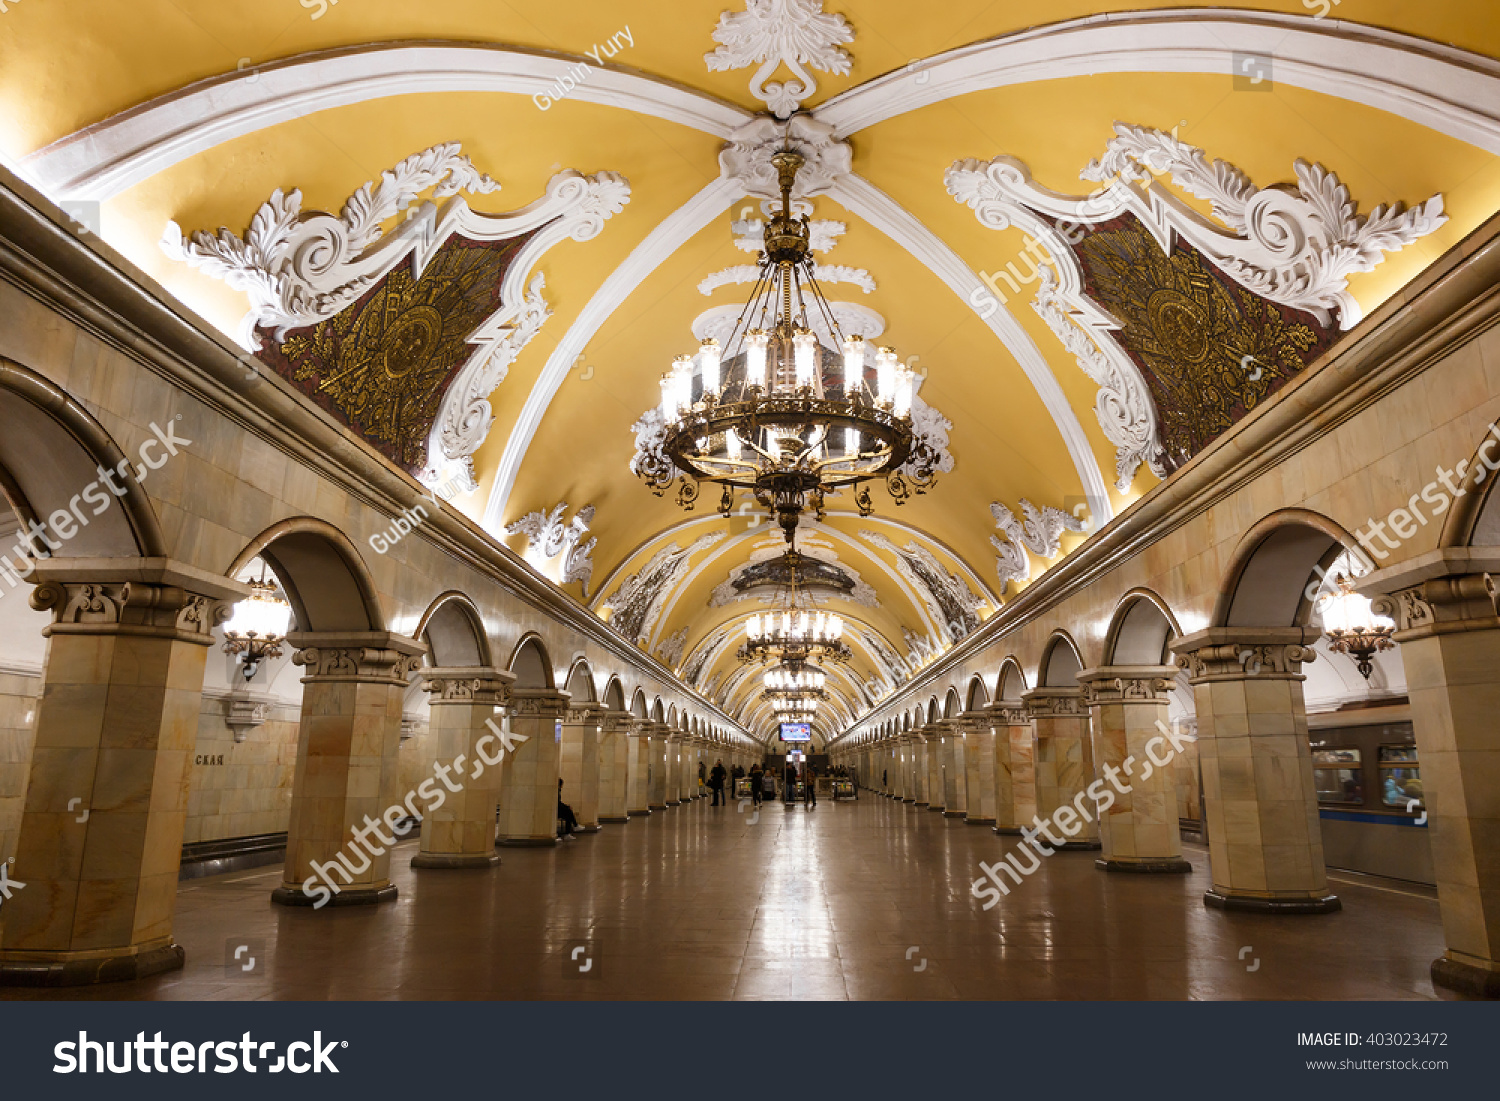 The hall of Komsomolskaya subway (Circle Line) in Moscow. This metro station is an example of one of the most attractive stalinist architecture of the city underground. #403023472